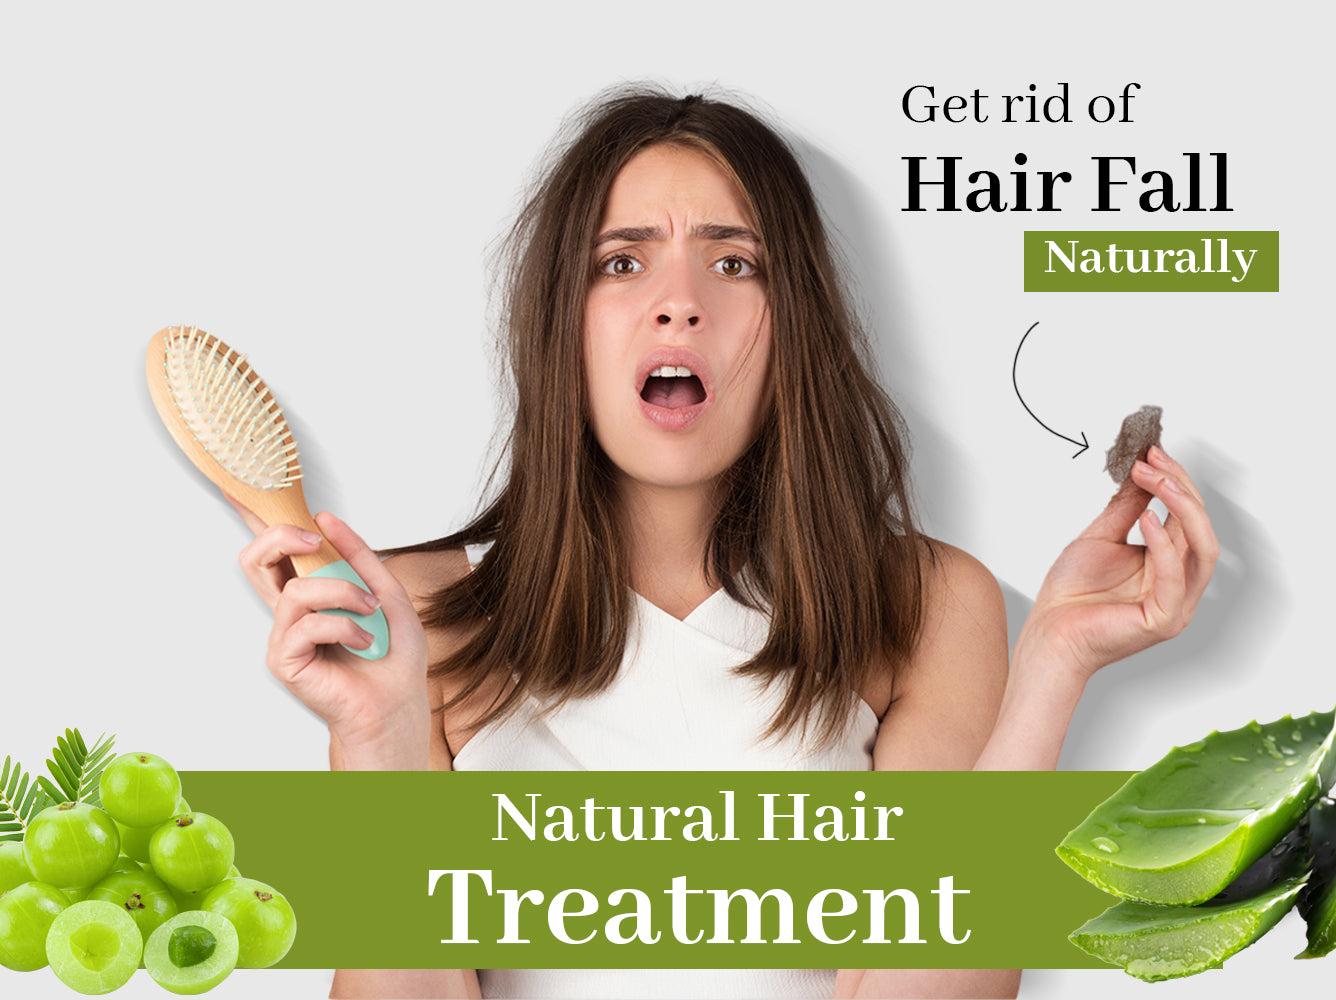 Herbal Hair Treatments: The Best Way to Combat Hair Fall Naturally